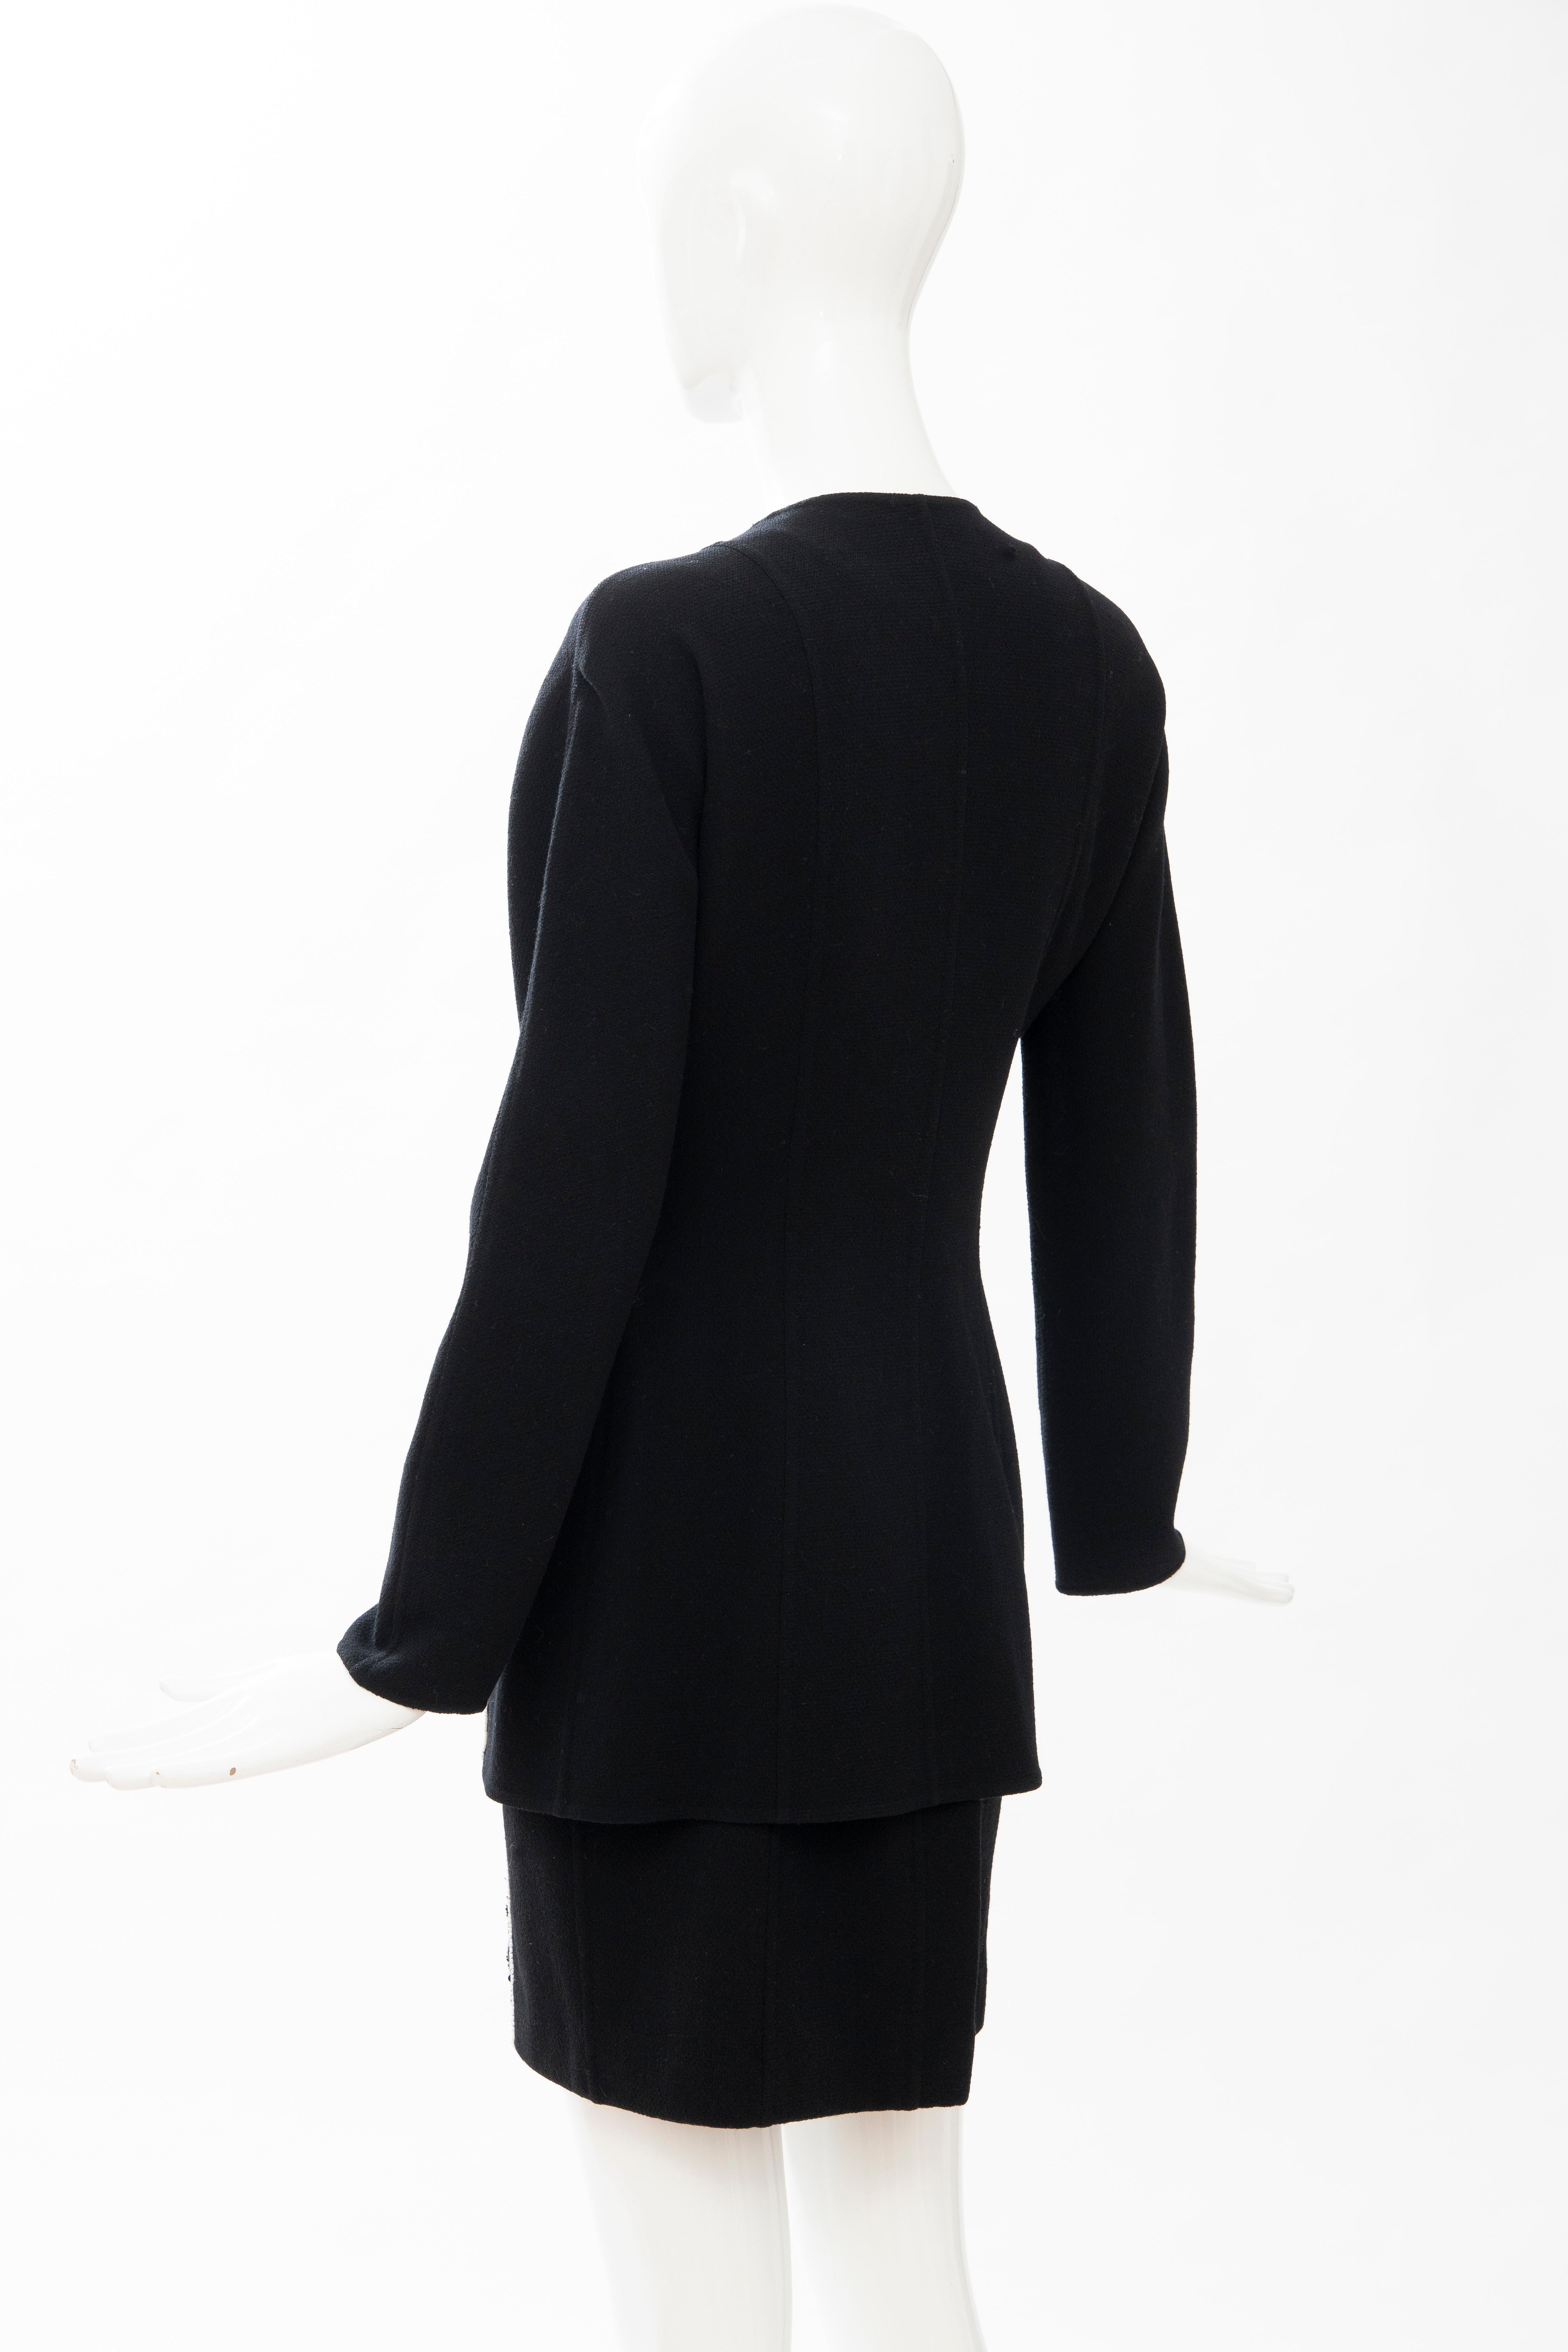 Geoffrey Beene Black Wool Crepe Embroidered Sequins Dress Ensemble, Circa 1990's For Sale 7